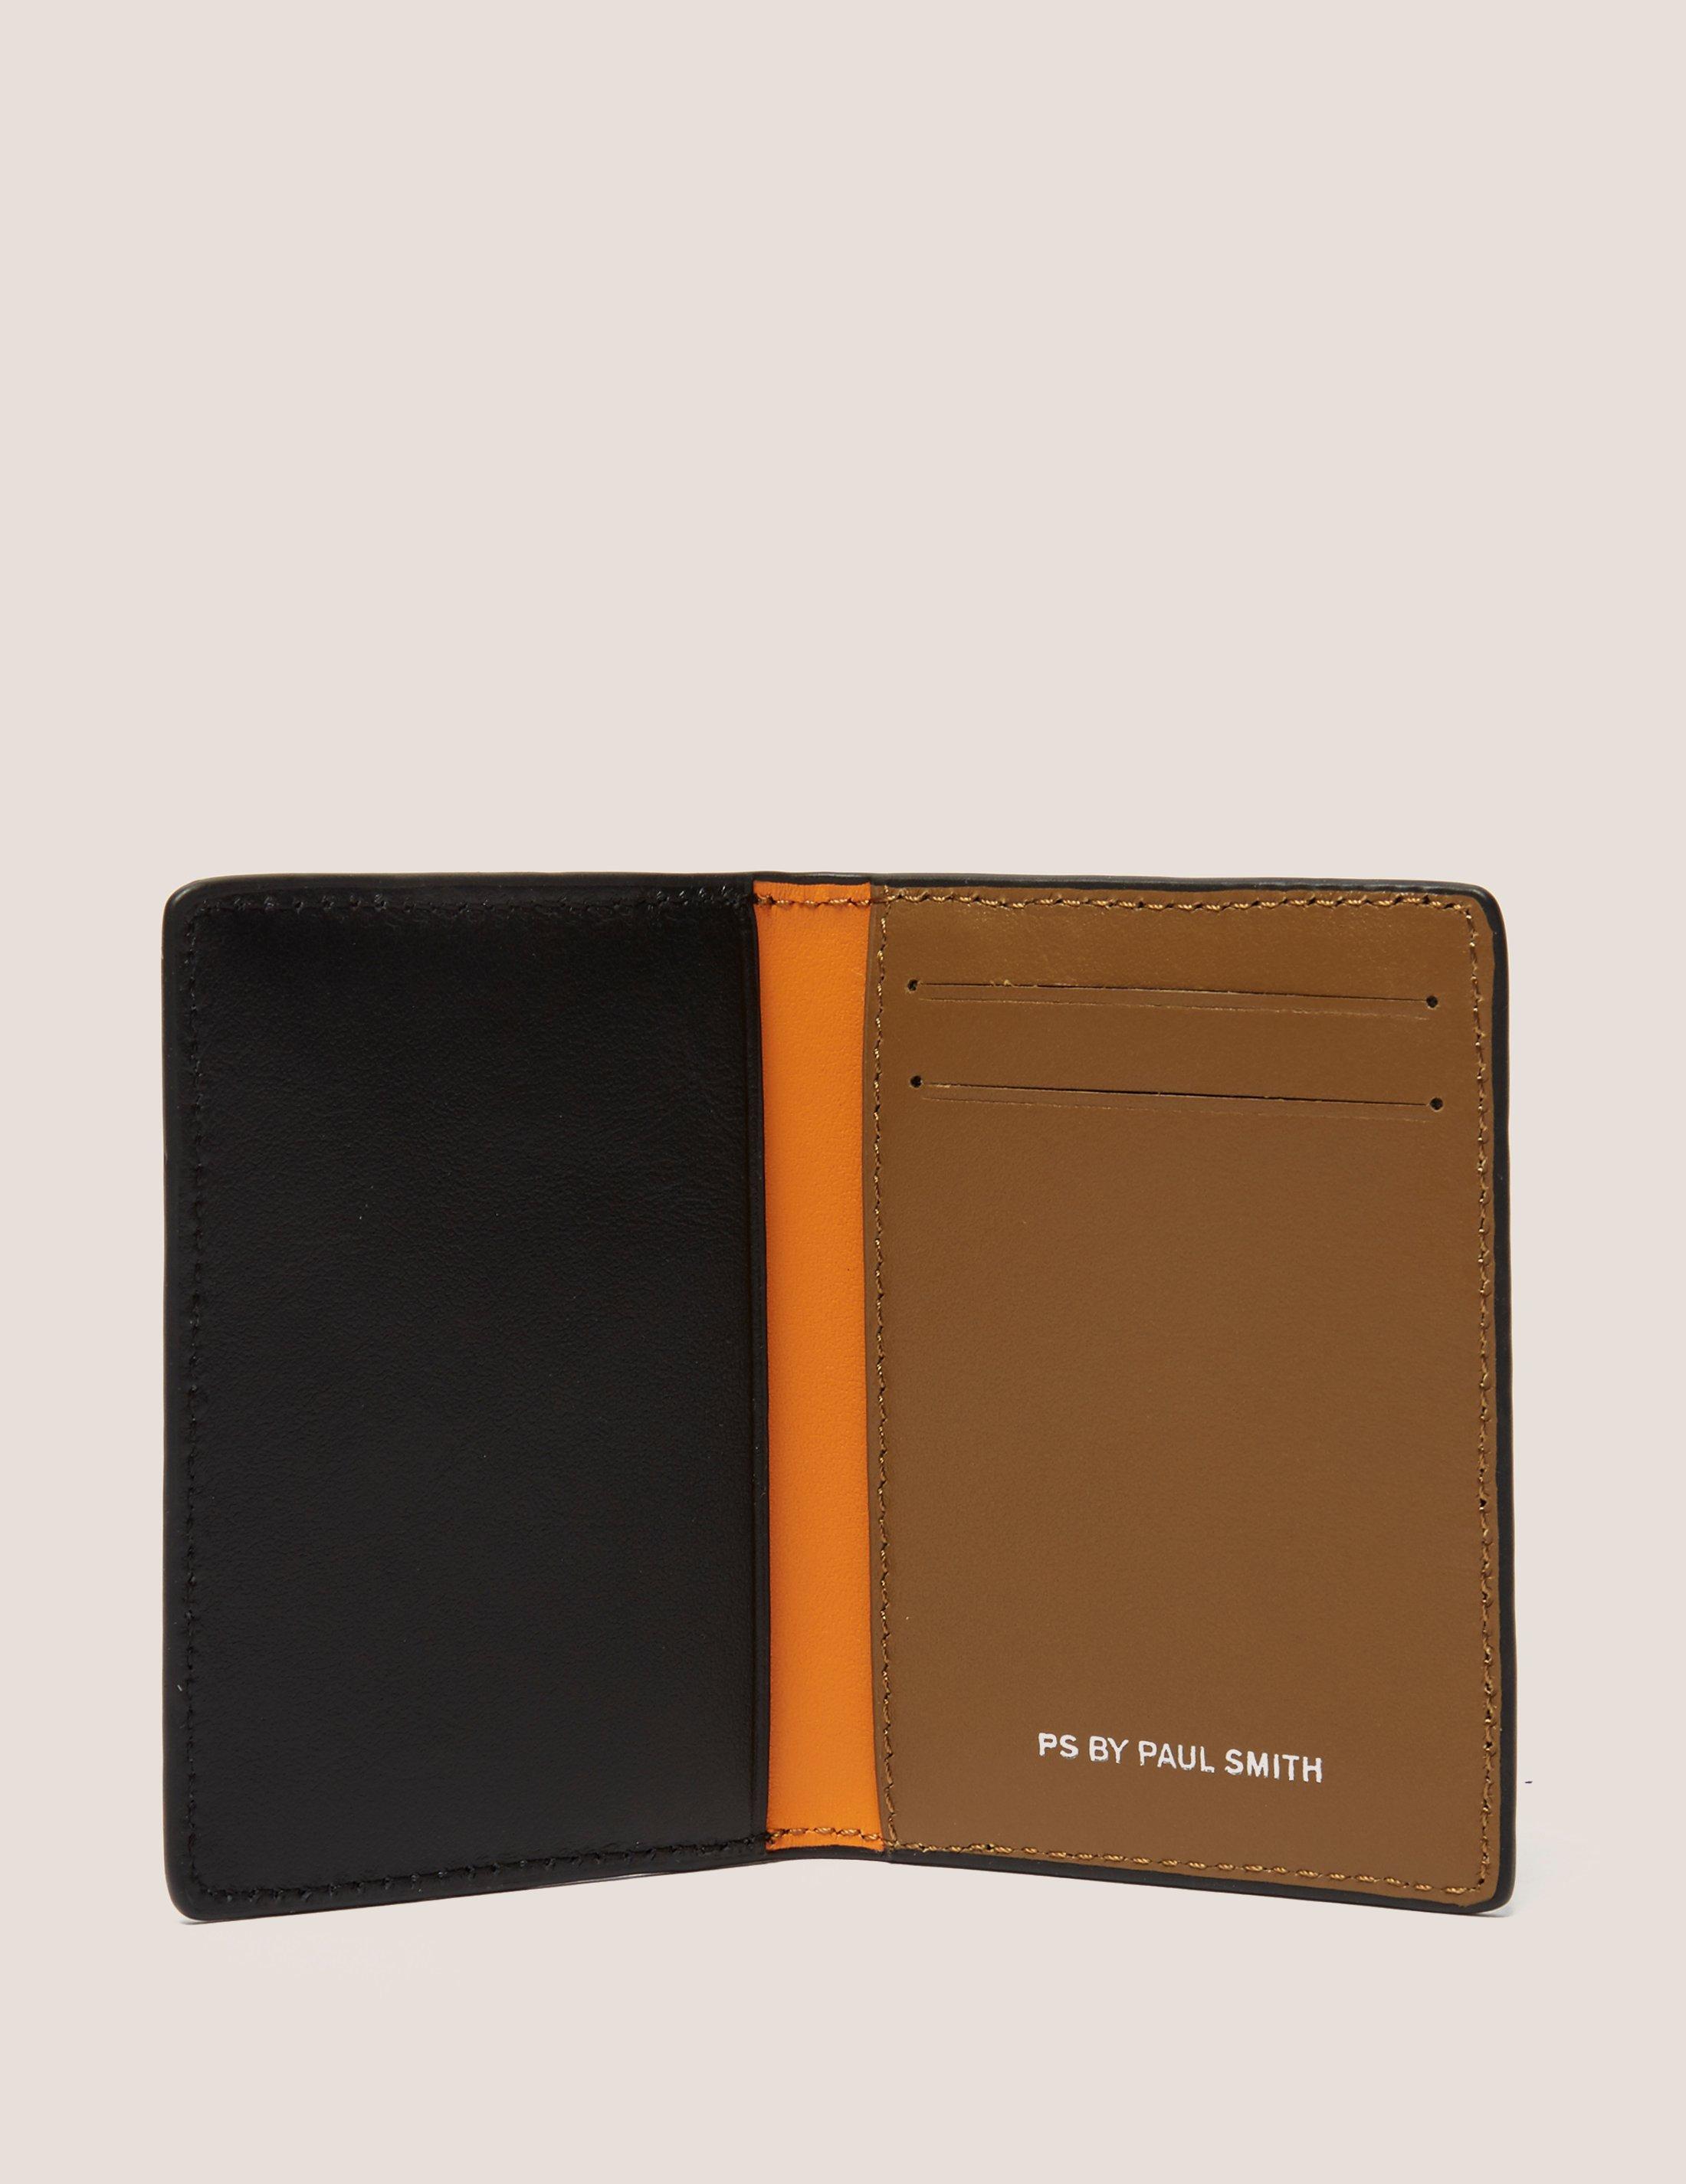 Lyst - Paul Smith Sporty Leather Credit Card Wallet in Black for Men